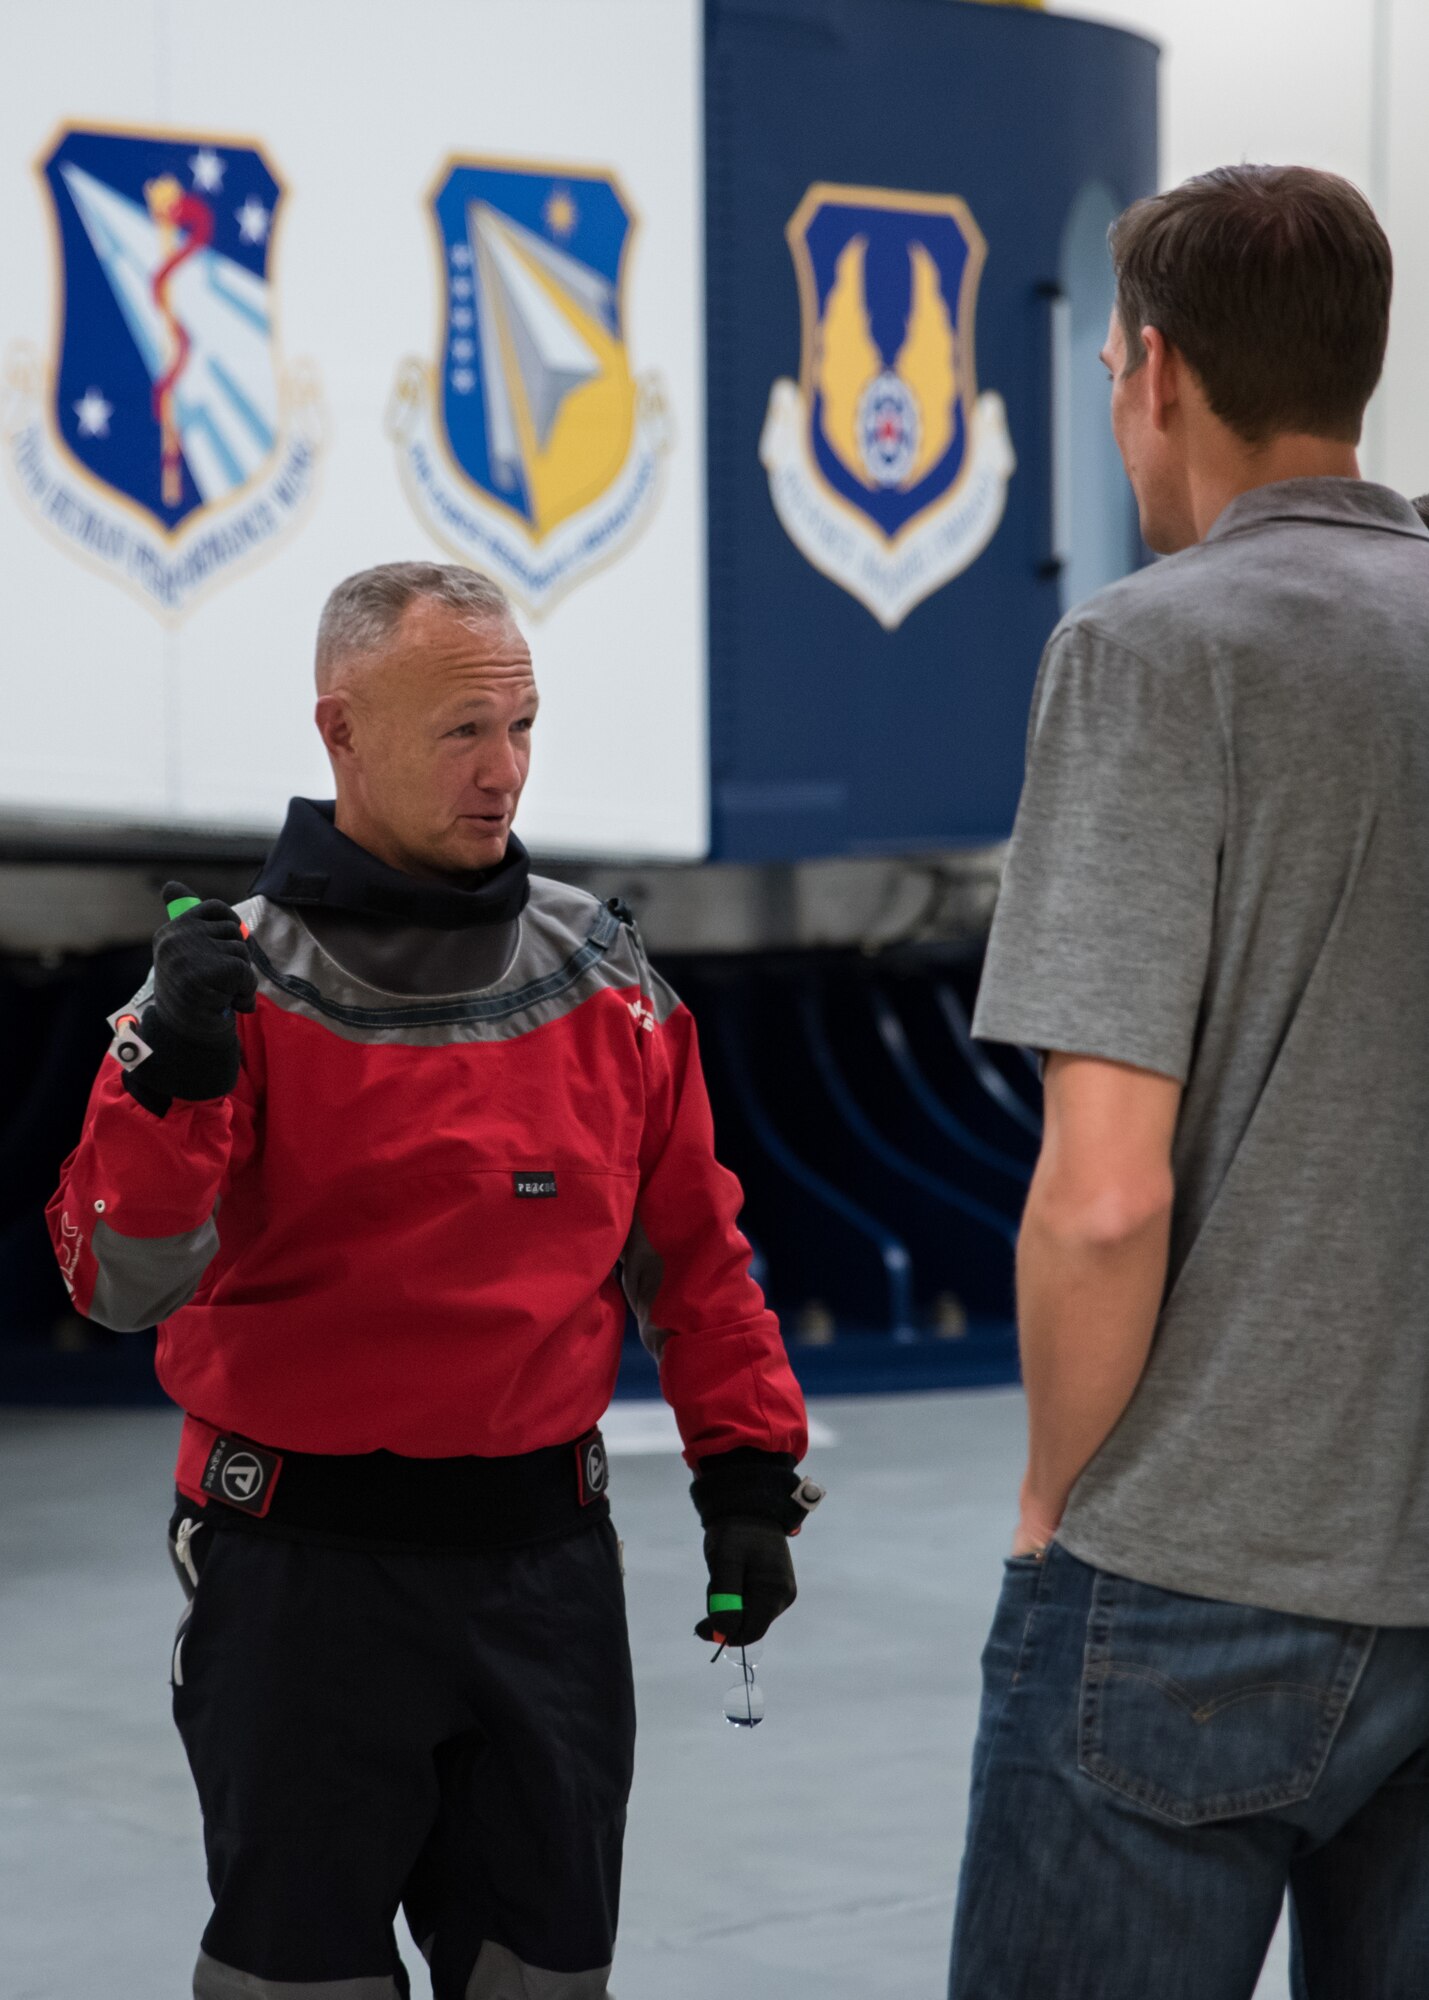 NASA astronaut Douglas Hurley speaks with a NASA engineer just before getting into the Air Force Research Laboratory’s centrifuge. Ten astronauts participated in the testing Nov. 1-2, 2018 – one with Boeing and nine with NASA. (U.S. Air Force photo / Richard Eldridge)